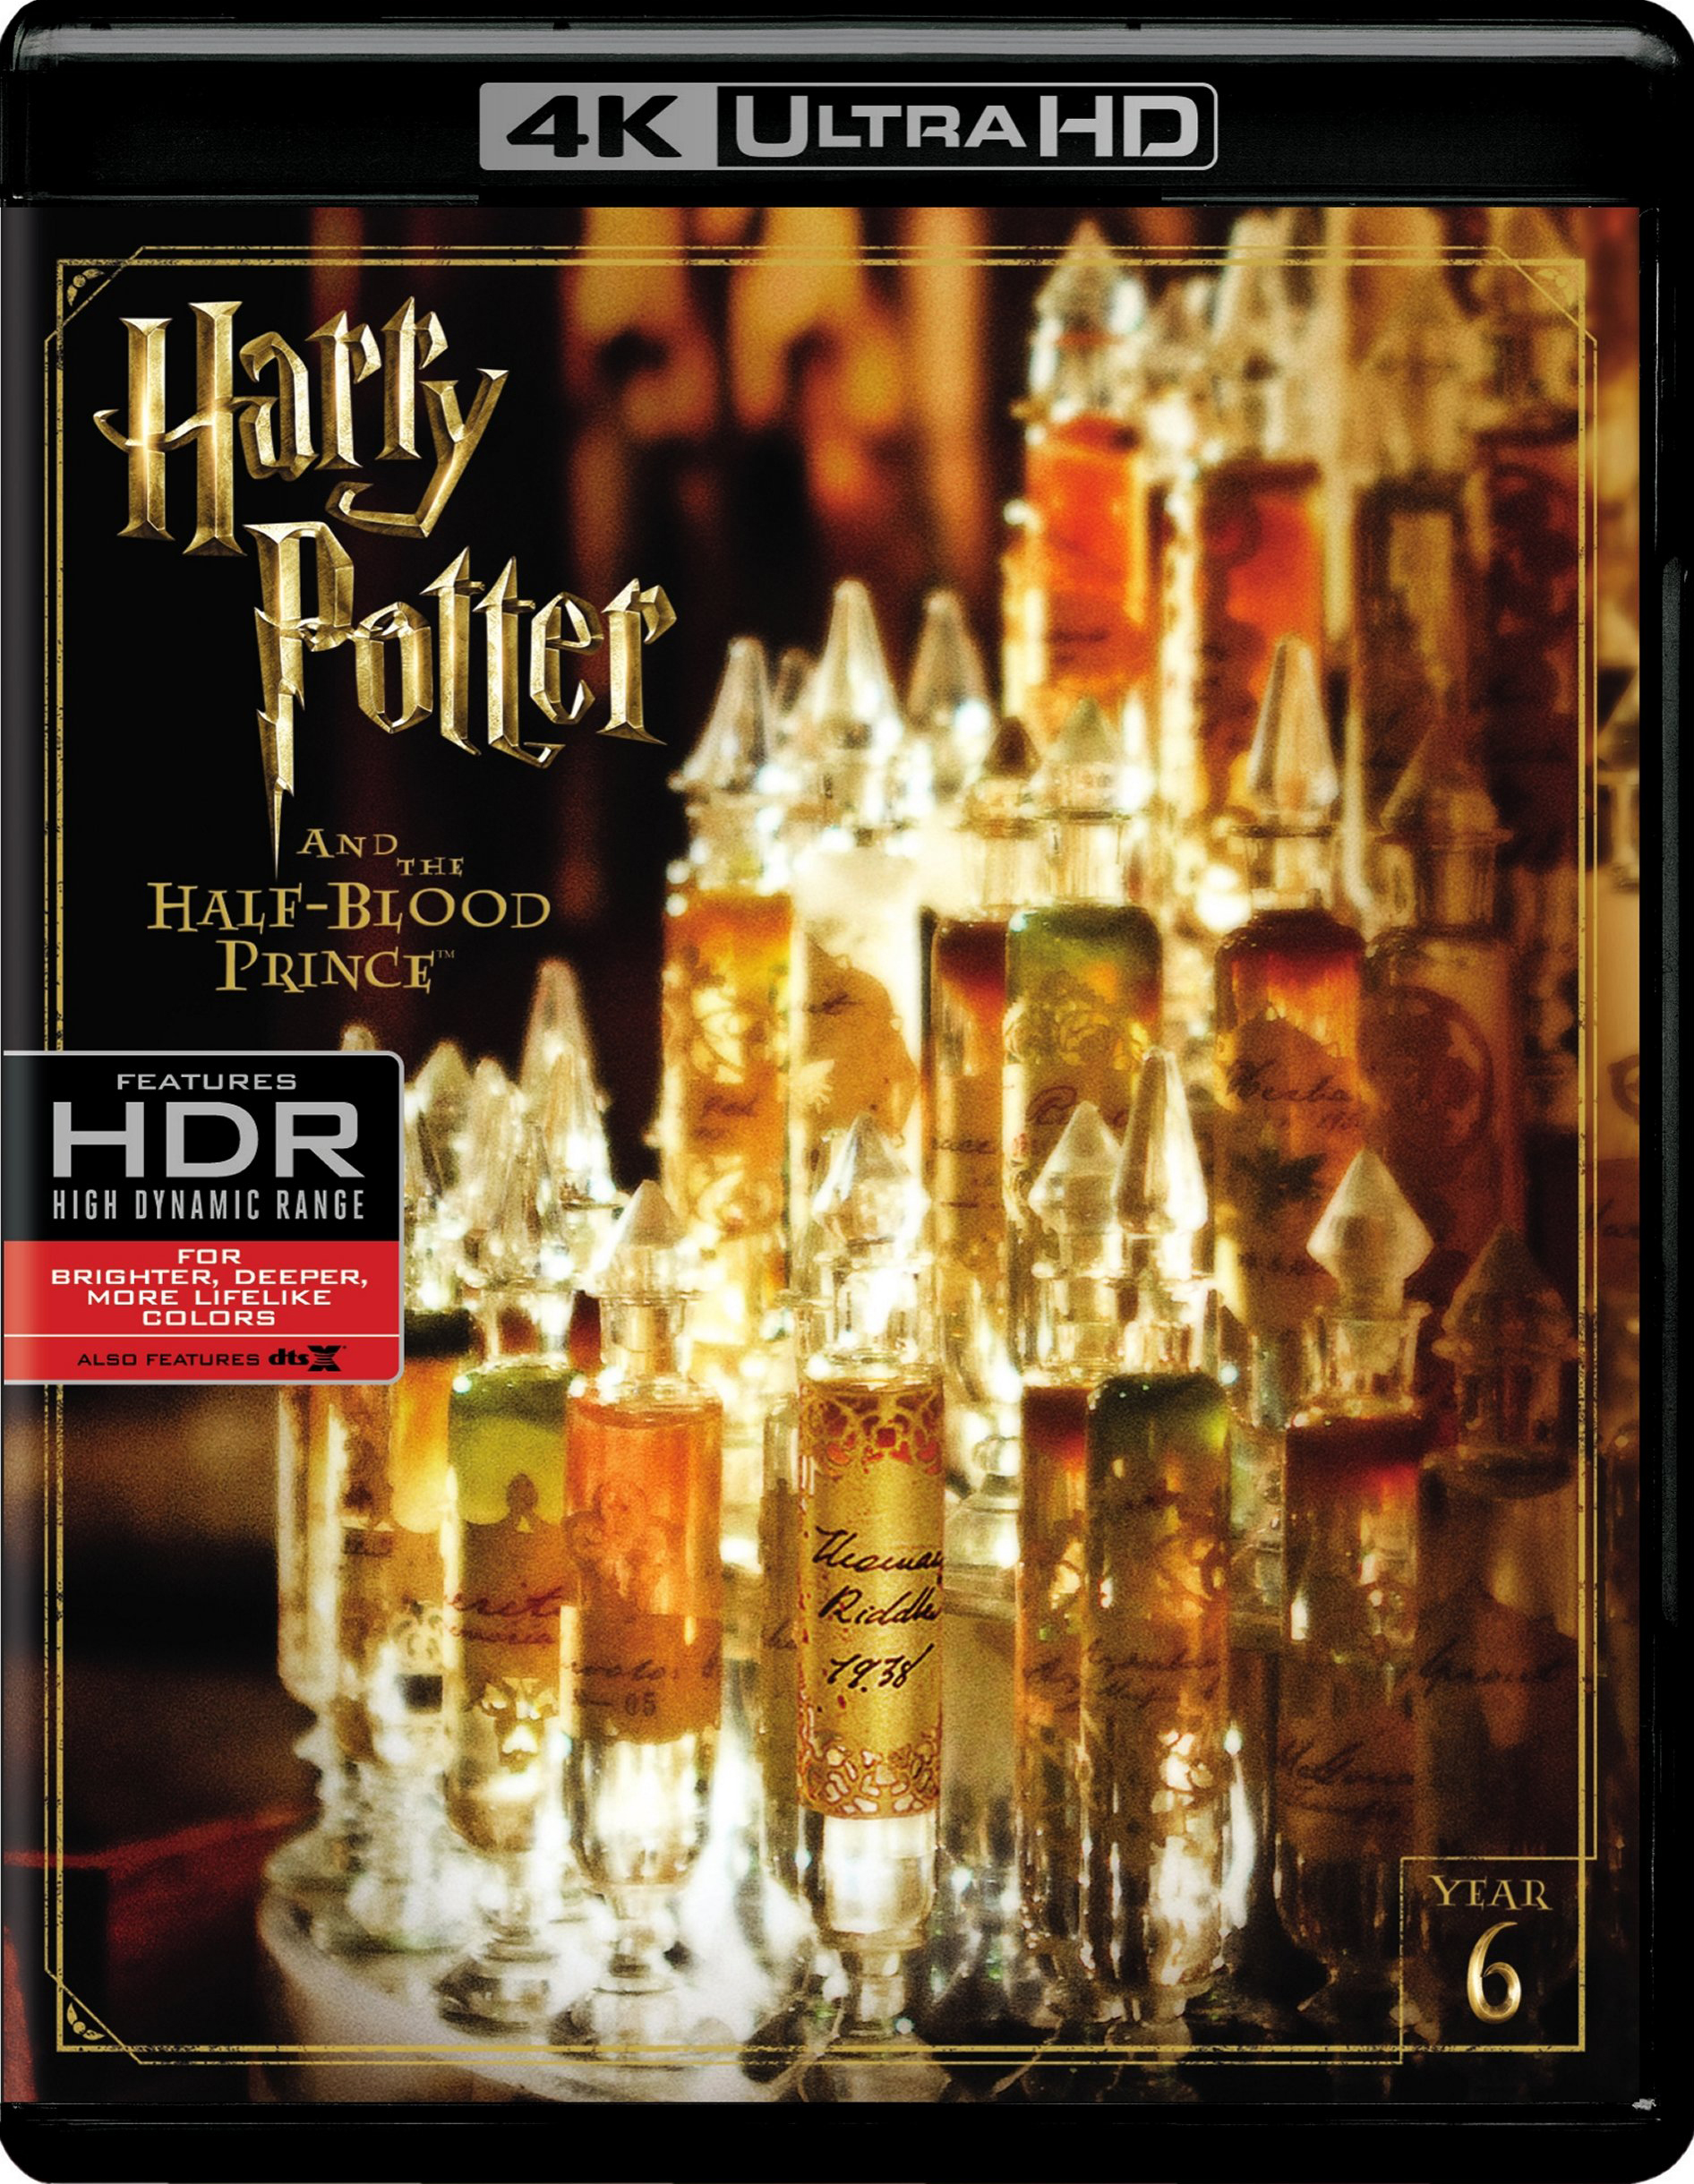 Harry Potter and the Half-Blood Prince [4K Ultra HD Blu-ray/Blu-ray] [2009]  - Best Buy